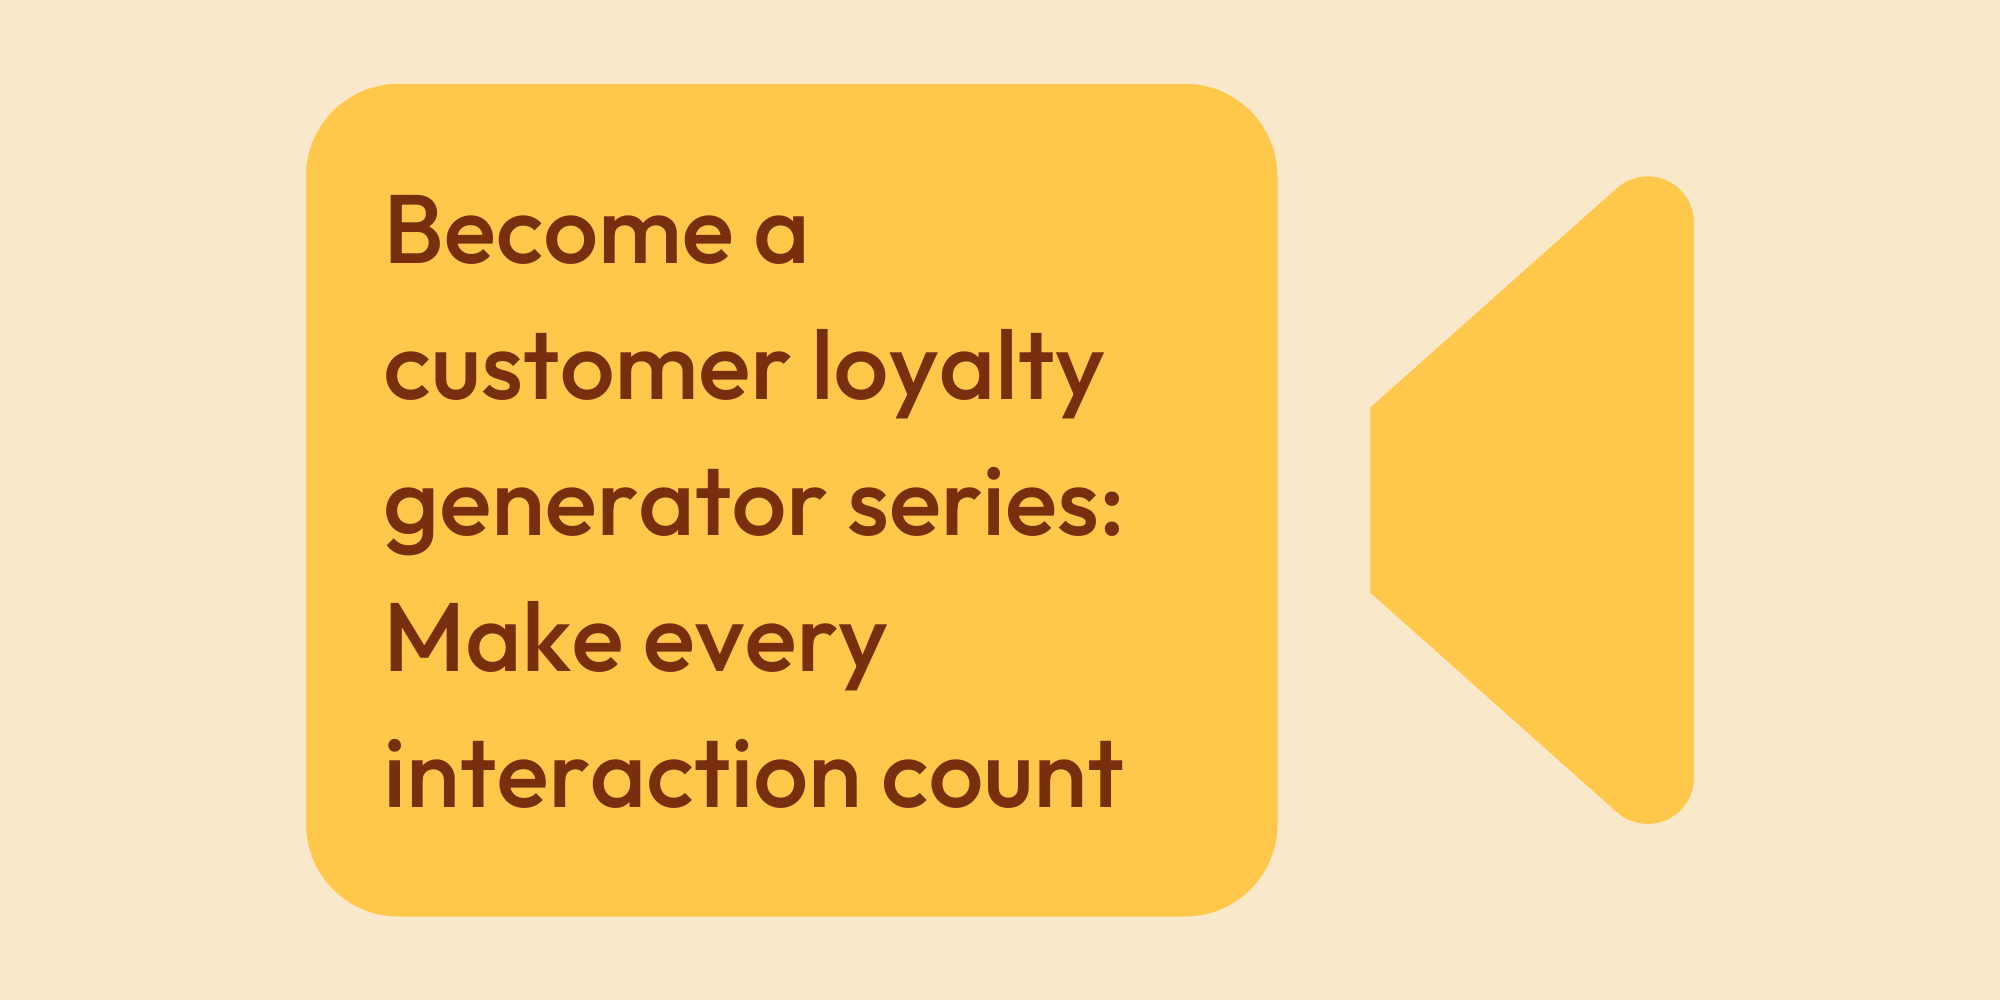 Become a customer loyalty generator series Make every interaction count